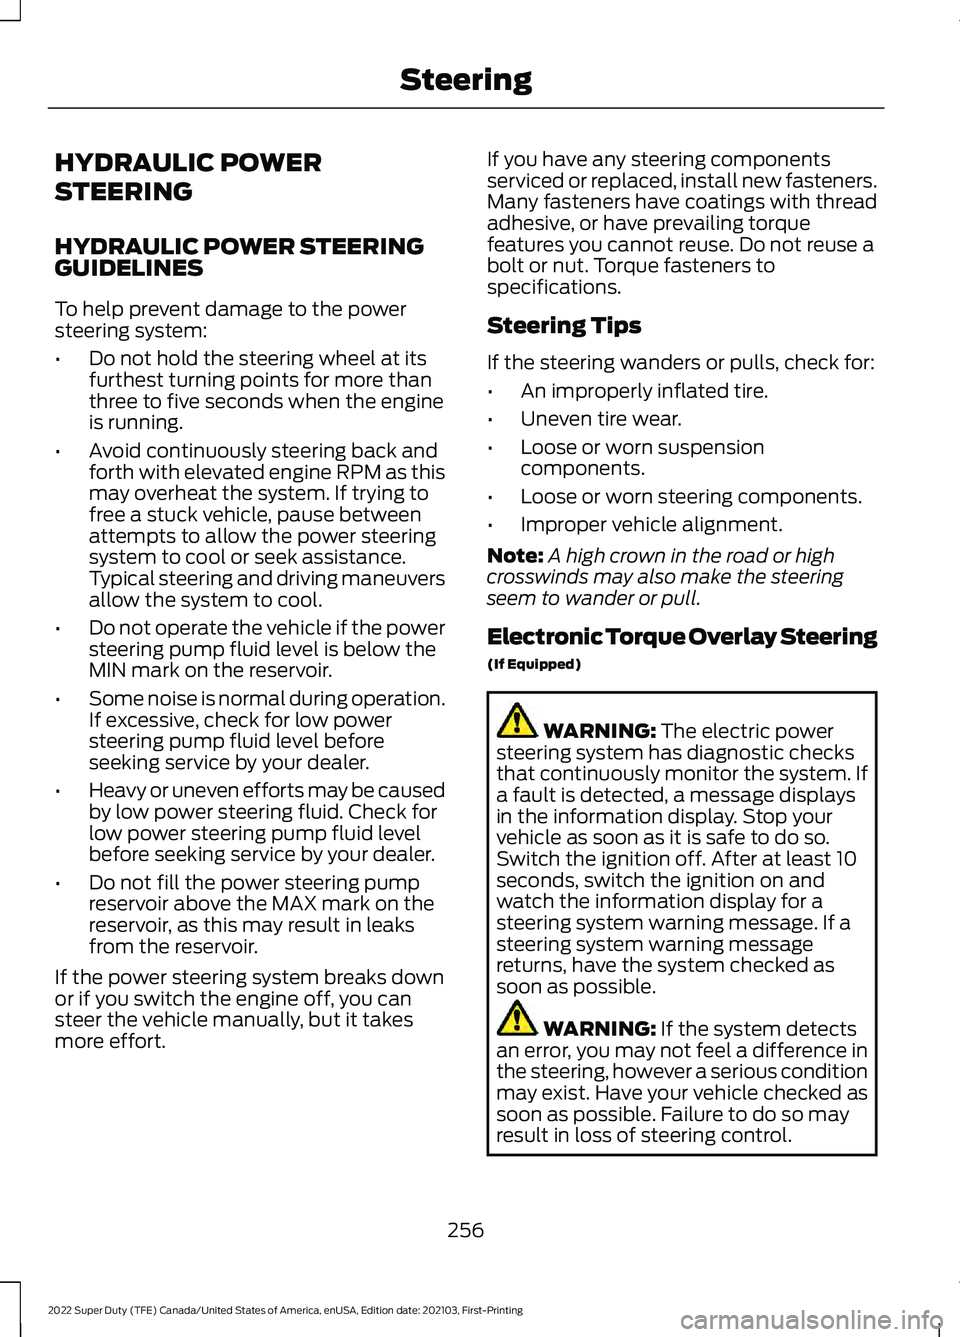 FORD F-350 2022  Owners Manual HYDRAULIC POWER
STEERING
HYDRAULIC POWER STEERING
GUIDELINES
To help prevent damage to the power
steering system:
•
Do not hold the steering wheel at its
furthest turning points for more than
three 